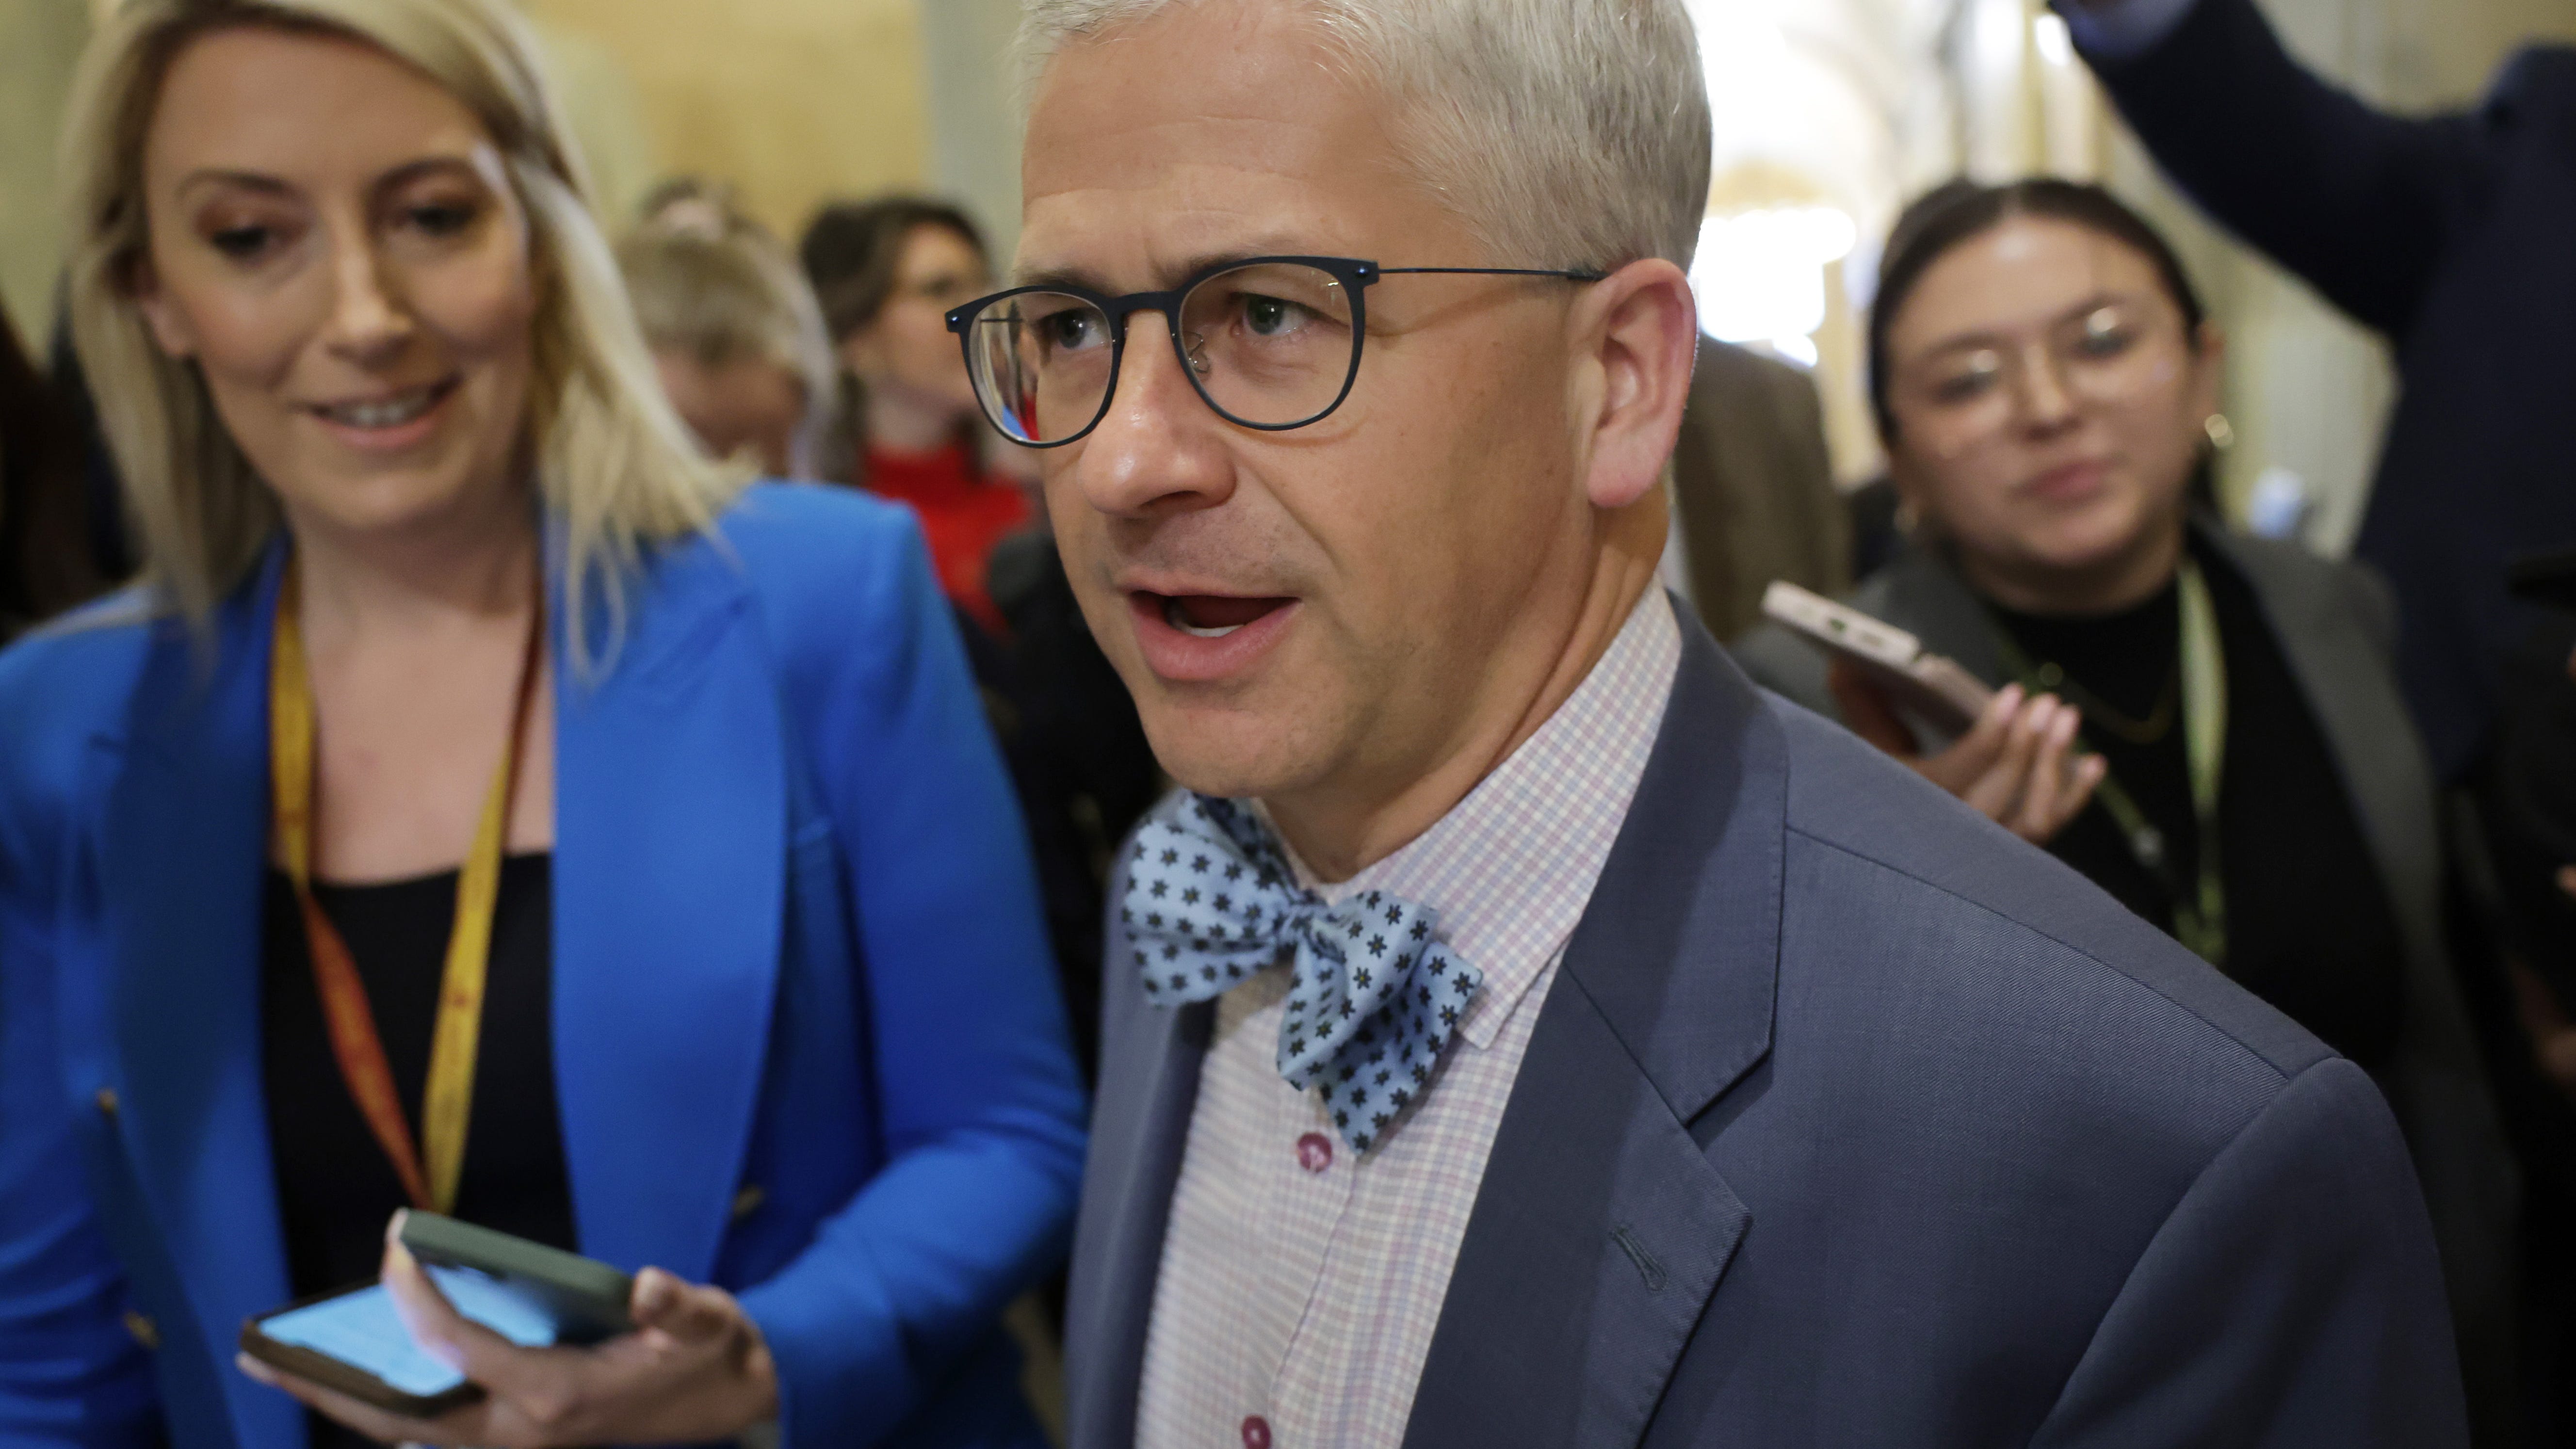 WASHINGTON, DC - MAY 25: U.S. Rep. Patrick McHenry (R-NC) speaks to members of the press in a hallway of the U.S. Capitol on May 25, 2023 in Washington, DC. The Republicans and the Biden Administration continue negotiations as the debt ceiling deadline approaches. (Photo by Alex Wong/Getty Images) ORG XMIT: 775982102 ORIG FILE ID: 1493237942